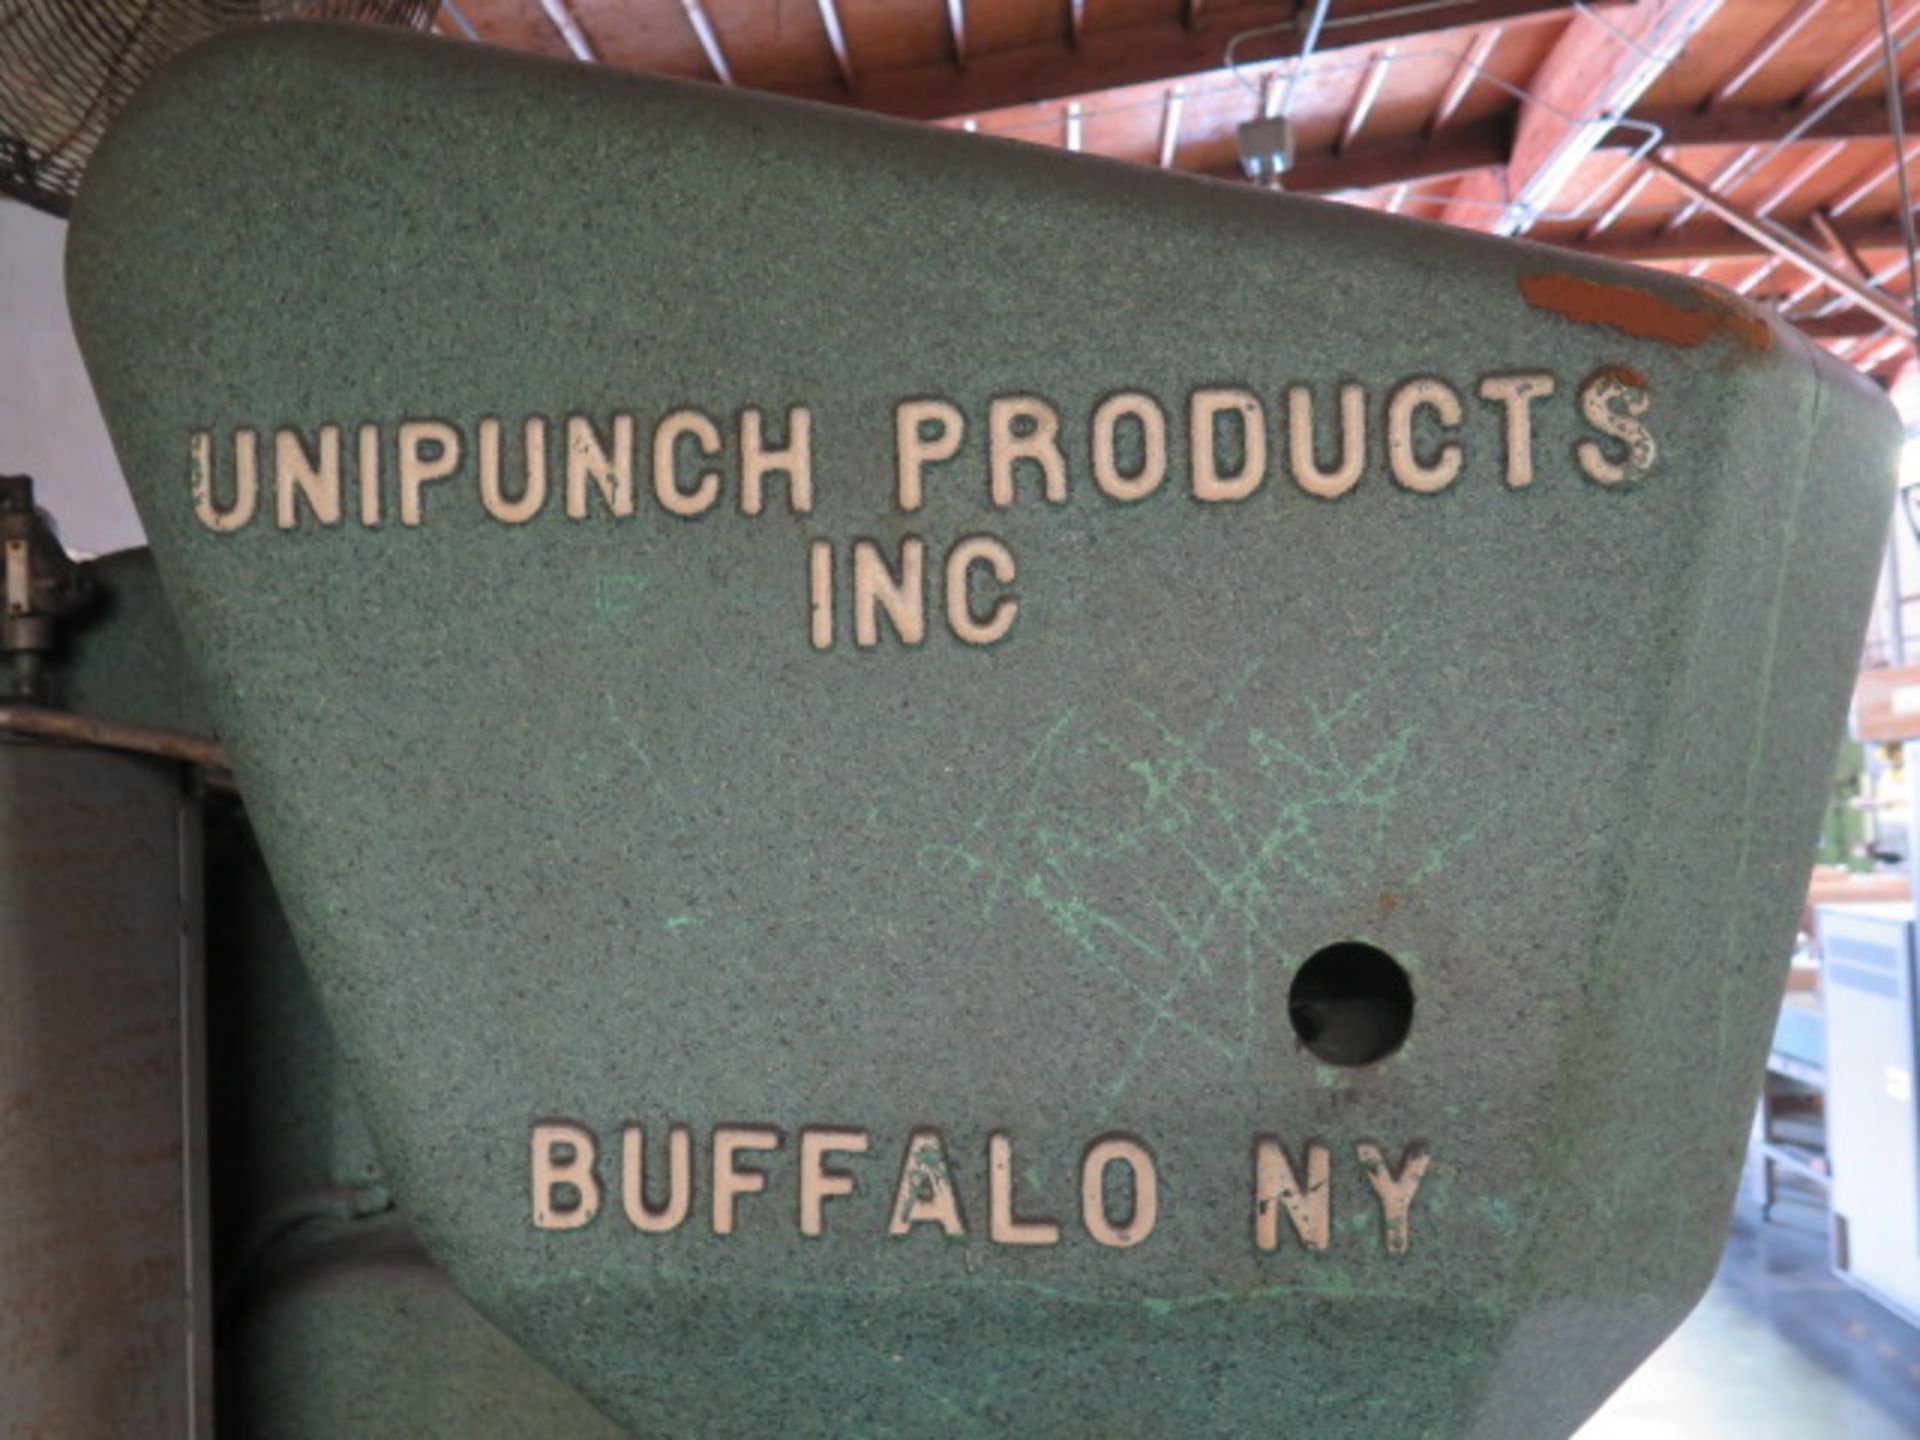 Unipunch Duplicator Punch Press (Rousselle 3G Retrofit) s/n 50-7-71-8 (SOLD AS-IS - NO WARRANTY) - Image 11 of 12